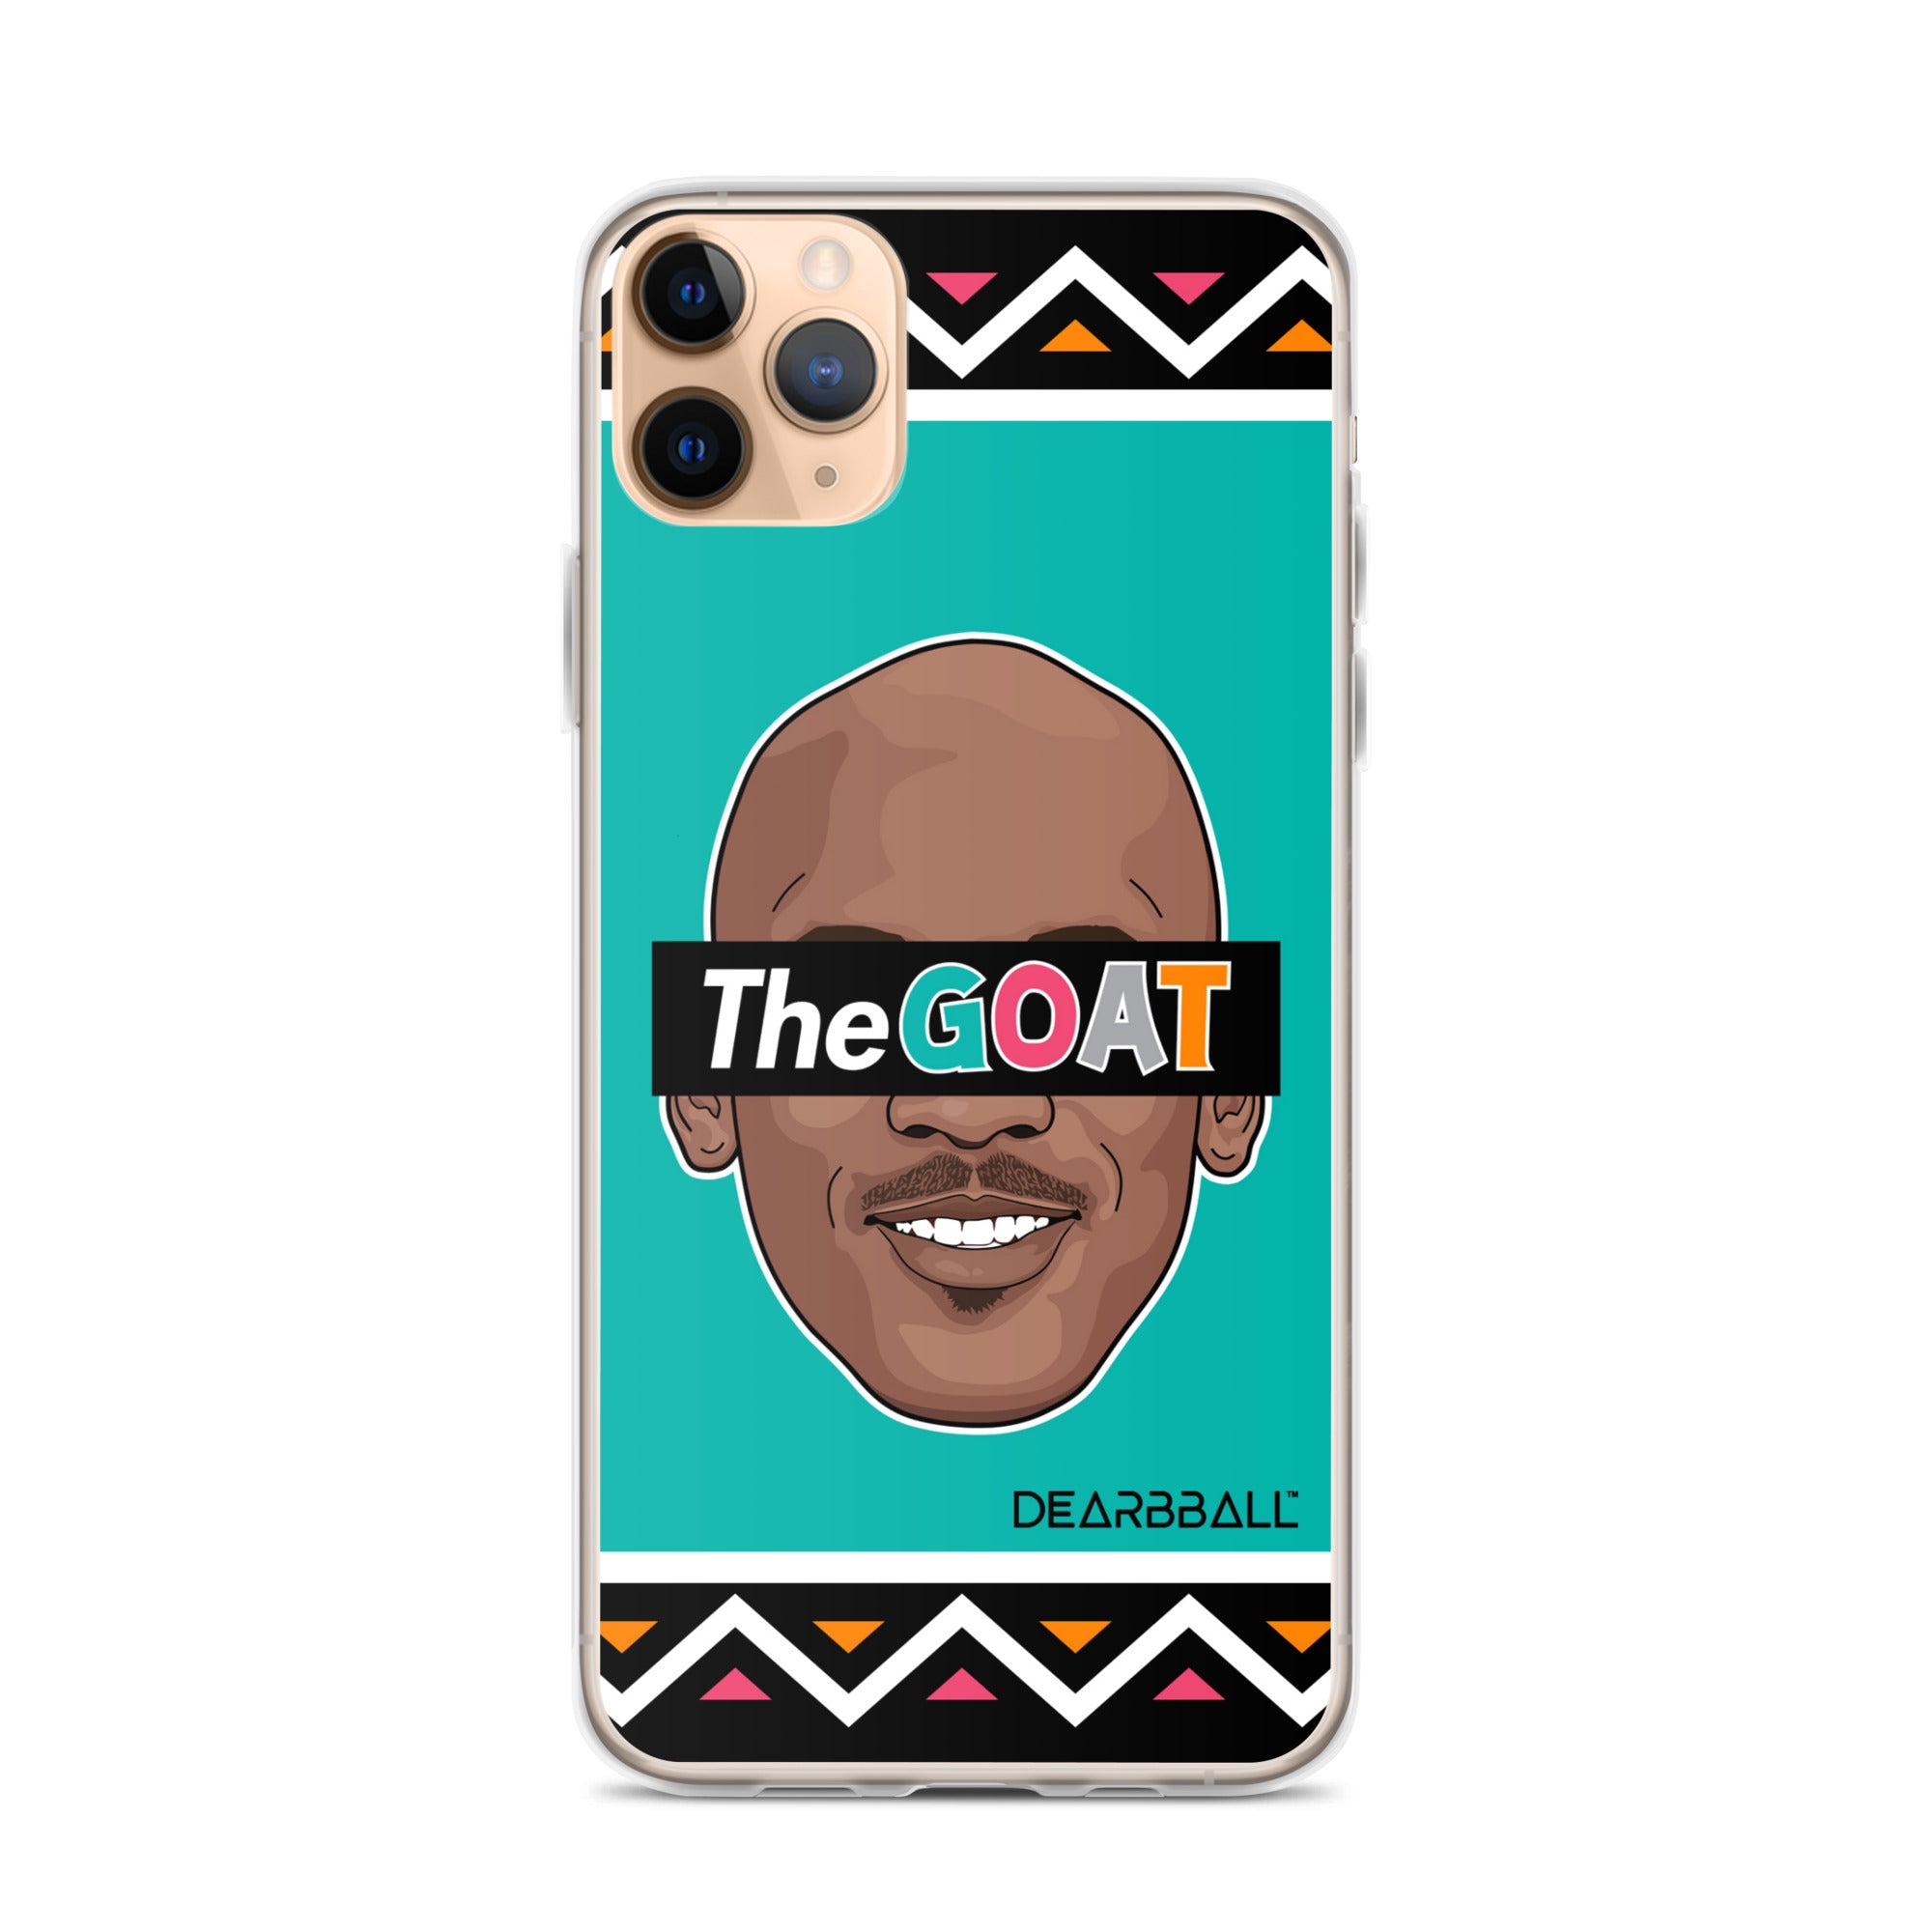 DearBBall Iphone Case - TheGOAT All Star Game 1996 Edition